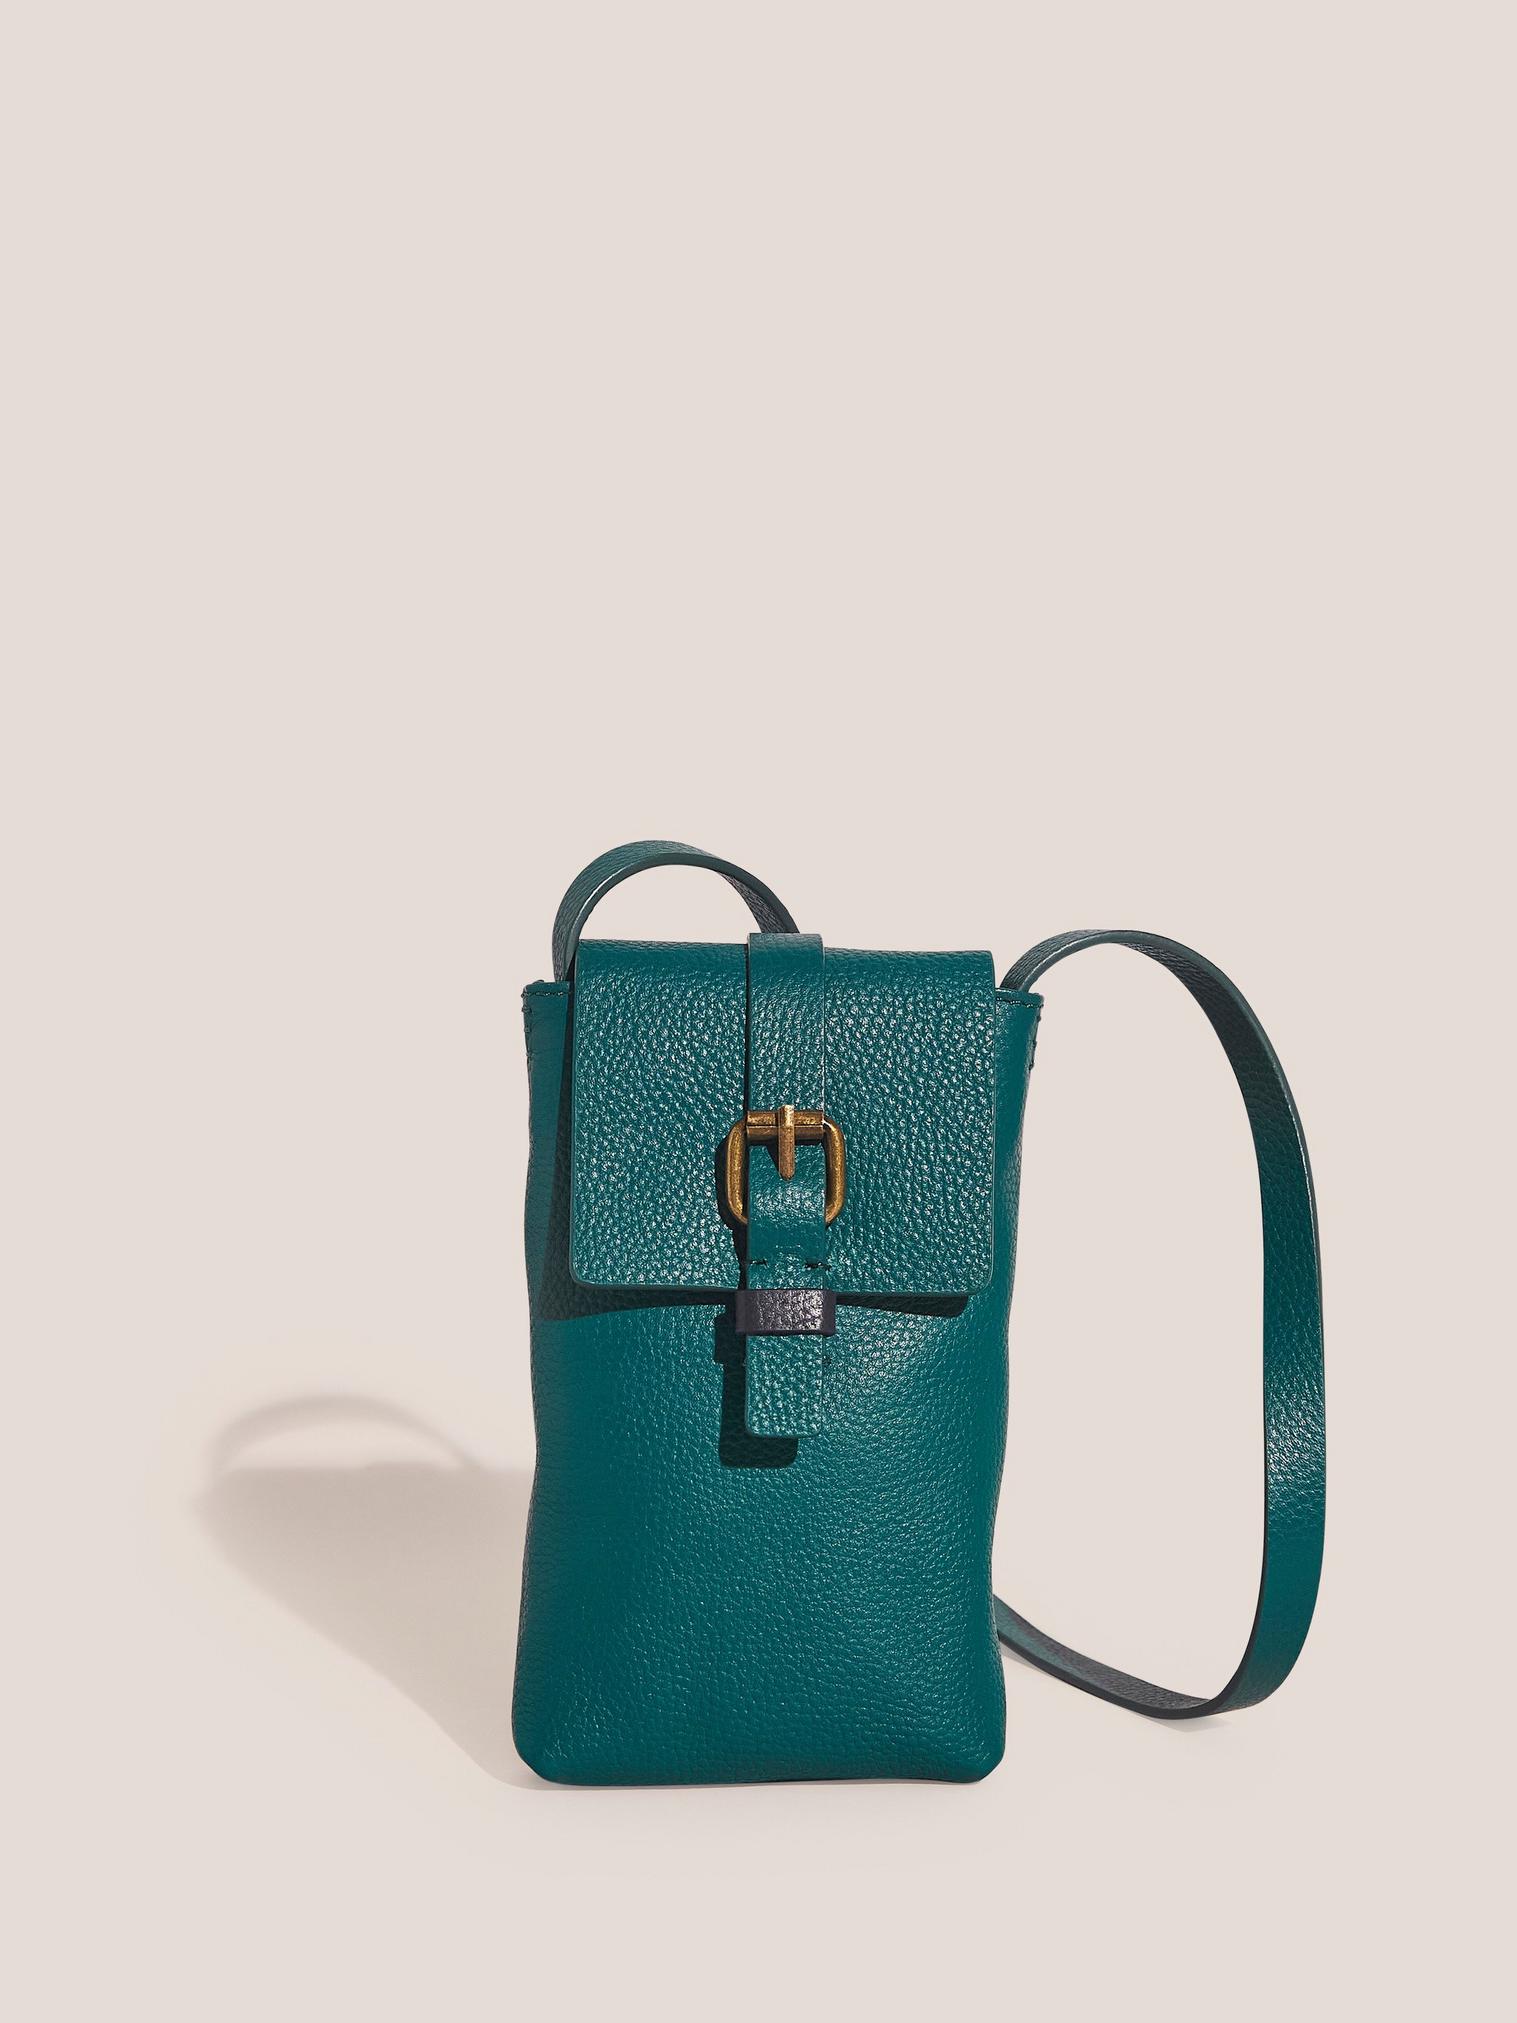 Clara Buckle Phone Bag in MID TEAL - FLAT FRONT